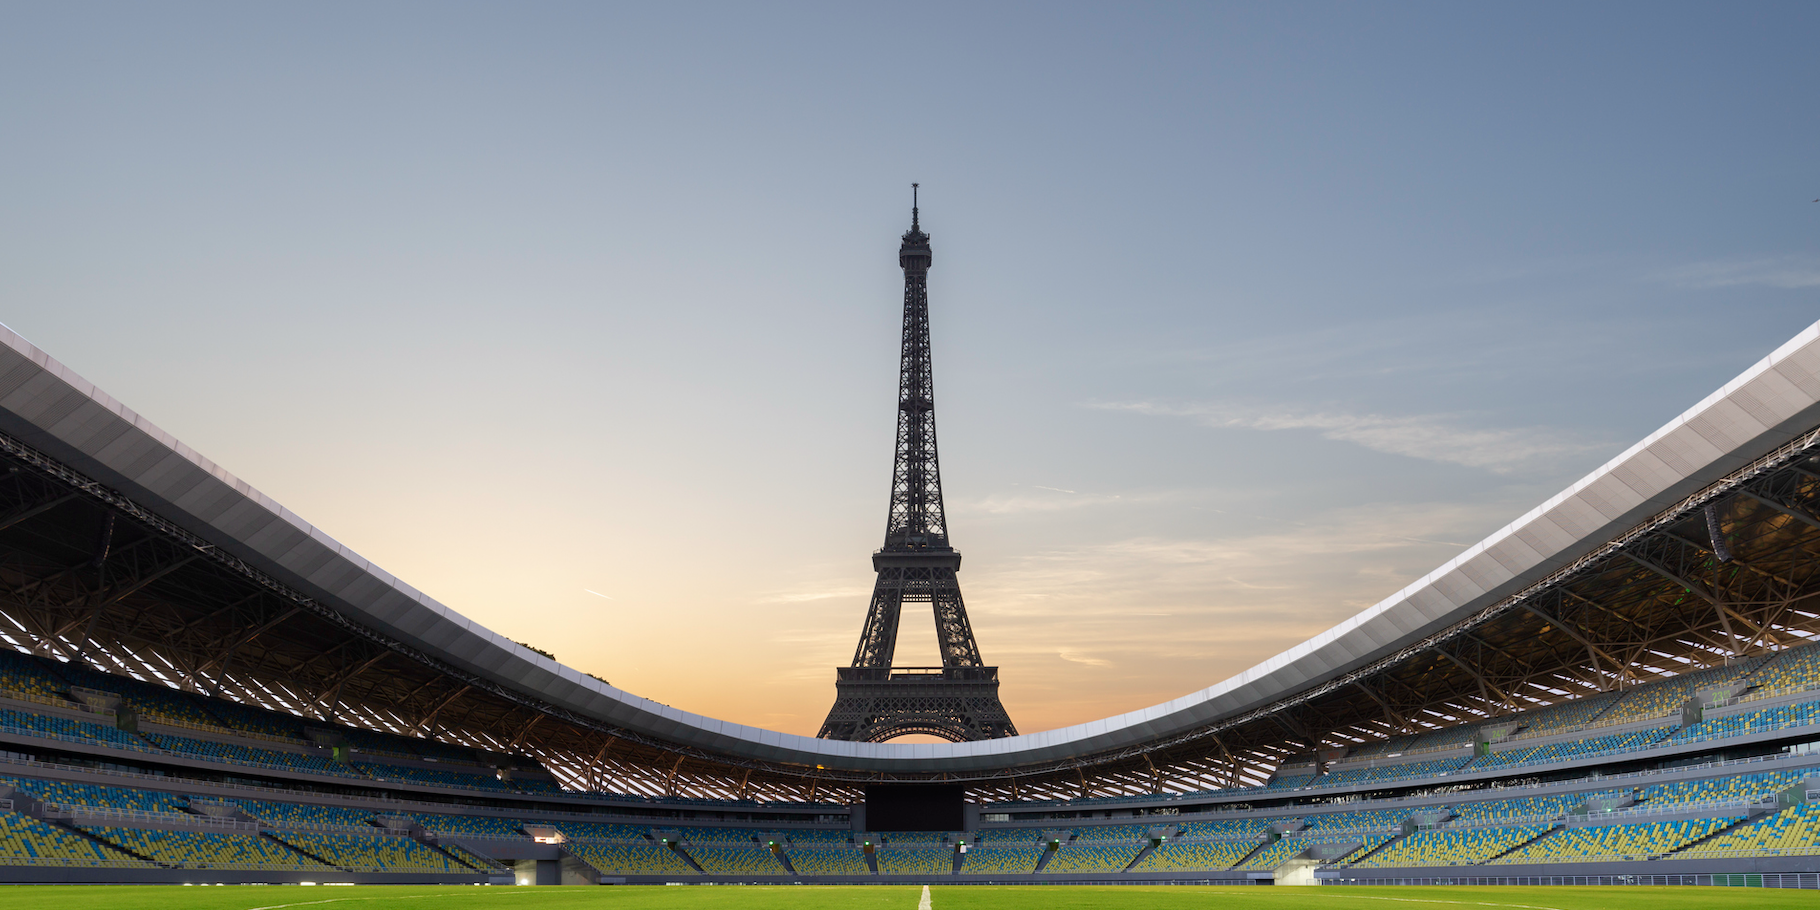 Seen from inside a stadium, the Eiffel Tower looms tall in the distance